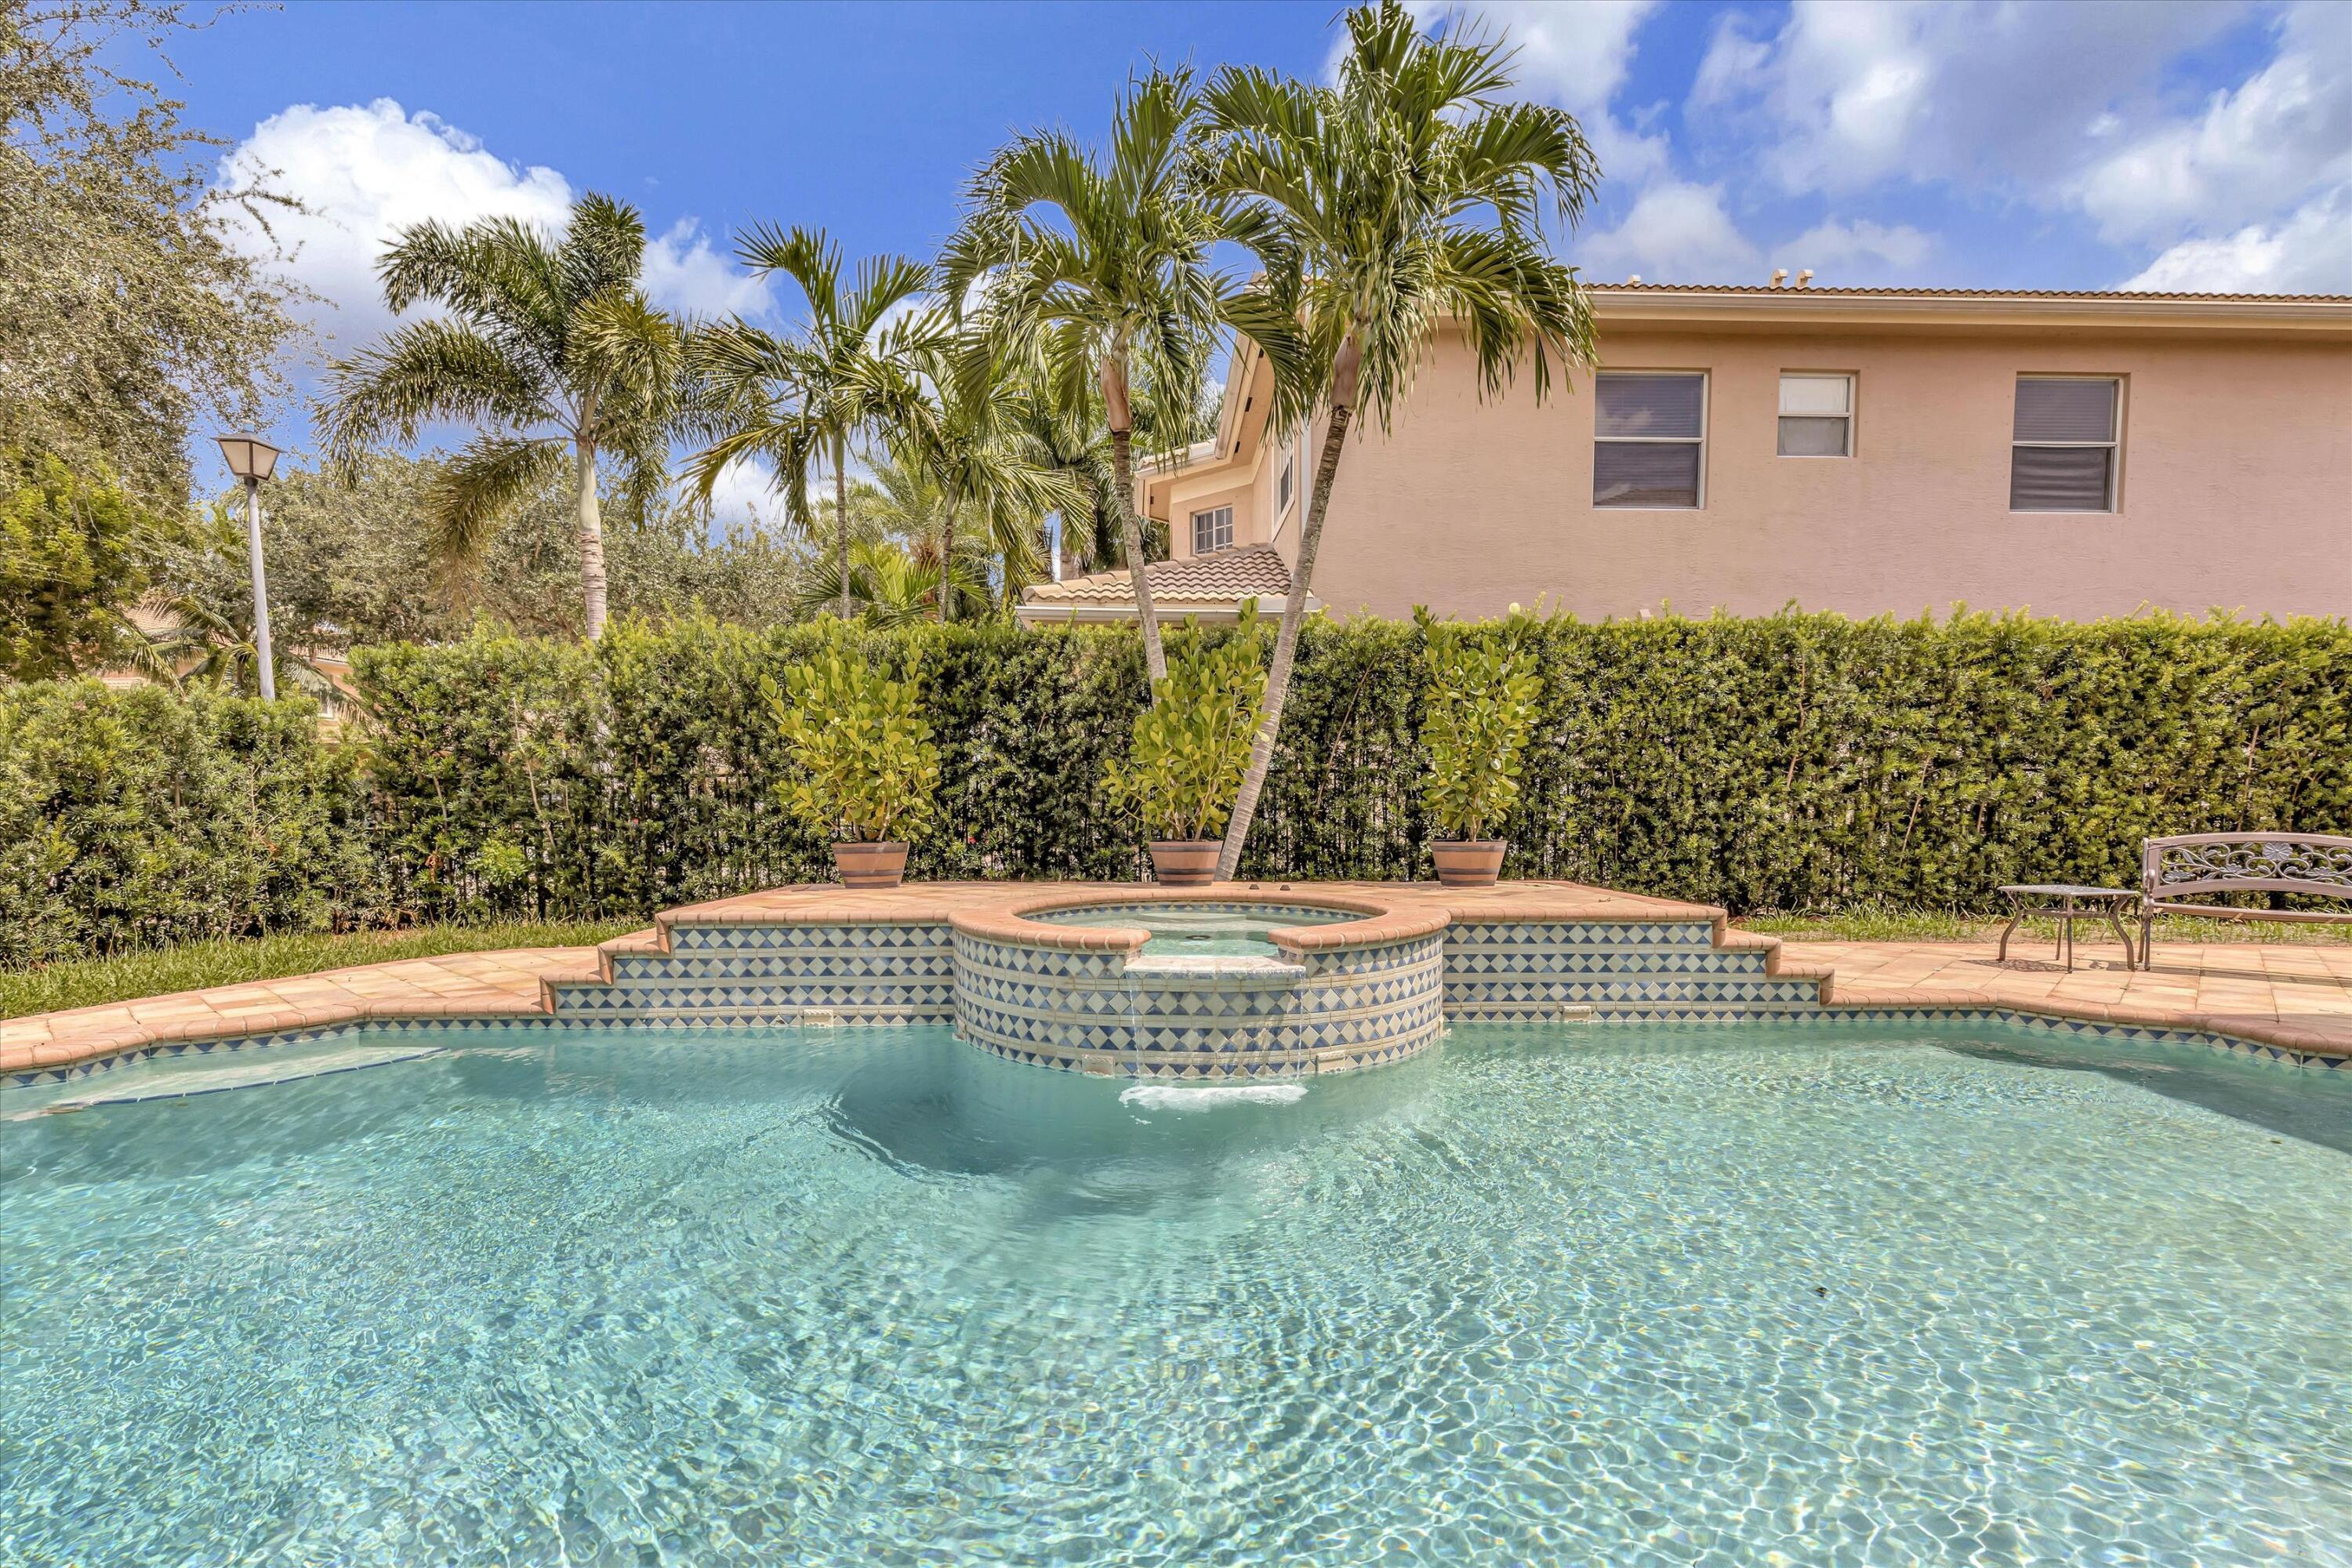 8674 Yellow Rose Court, Boynton Beach, Florida, 33473, United States, 5 Bedrooms Bedrooms, ,5 BathroomsBathrooms,Residential,For Sale,8674 Yellow Rose Court,1474070